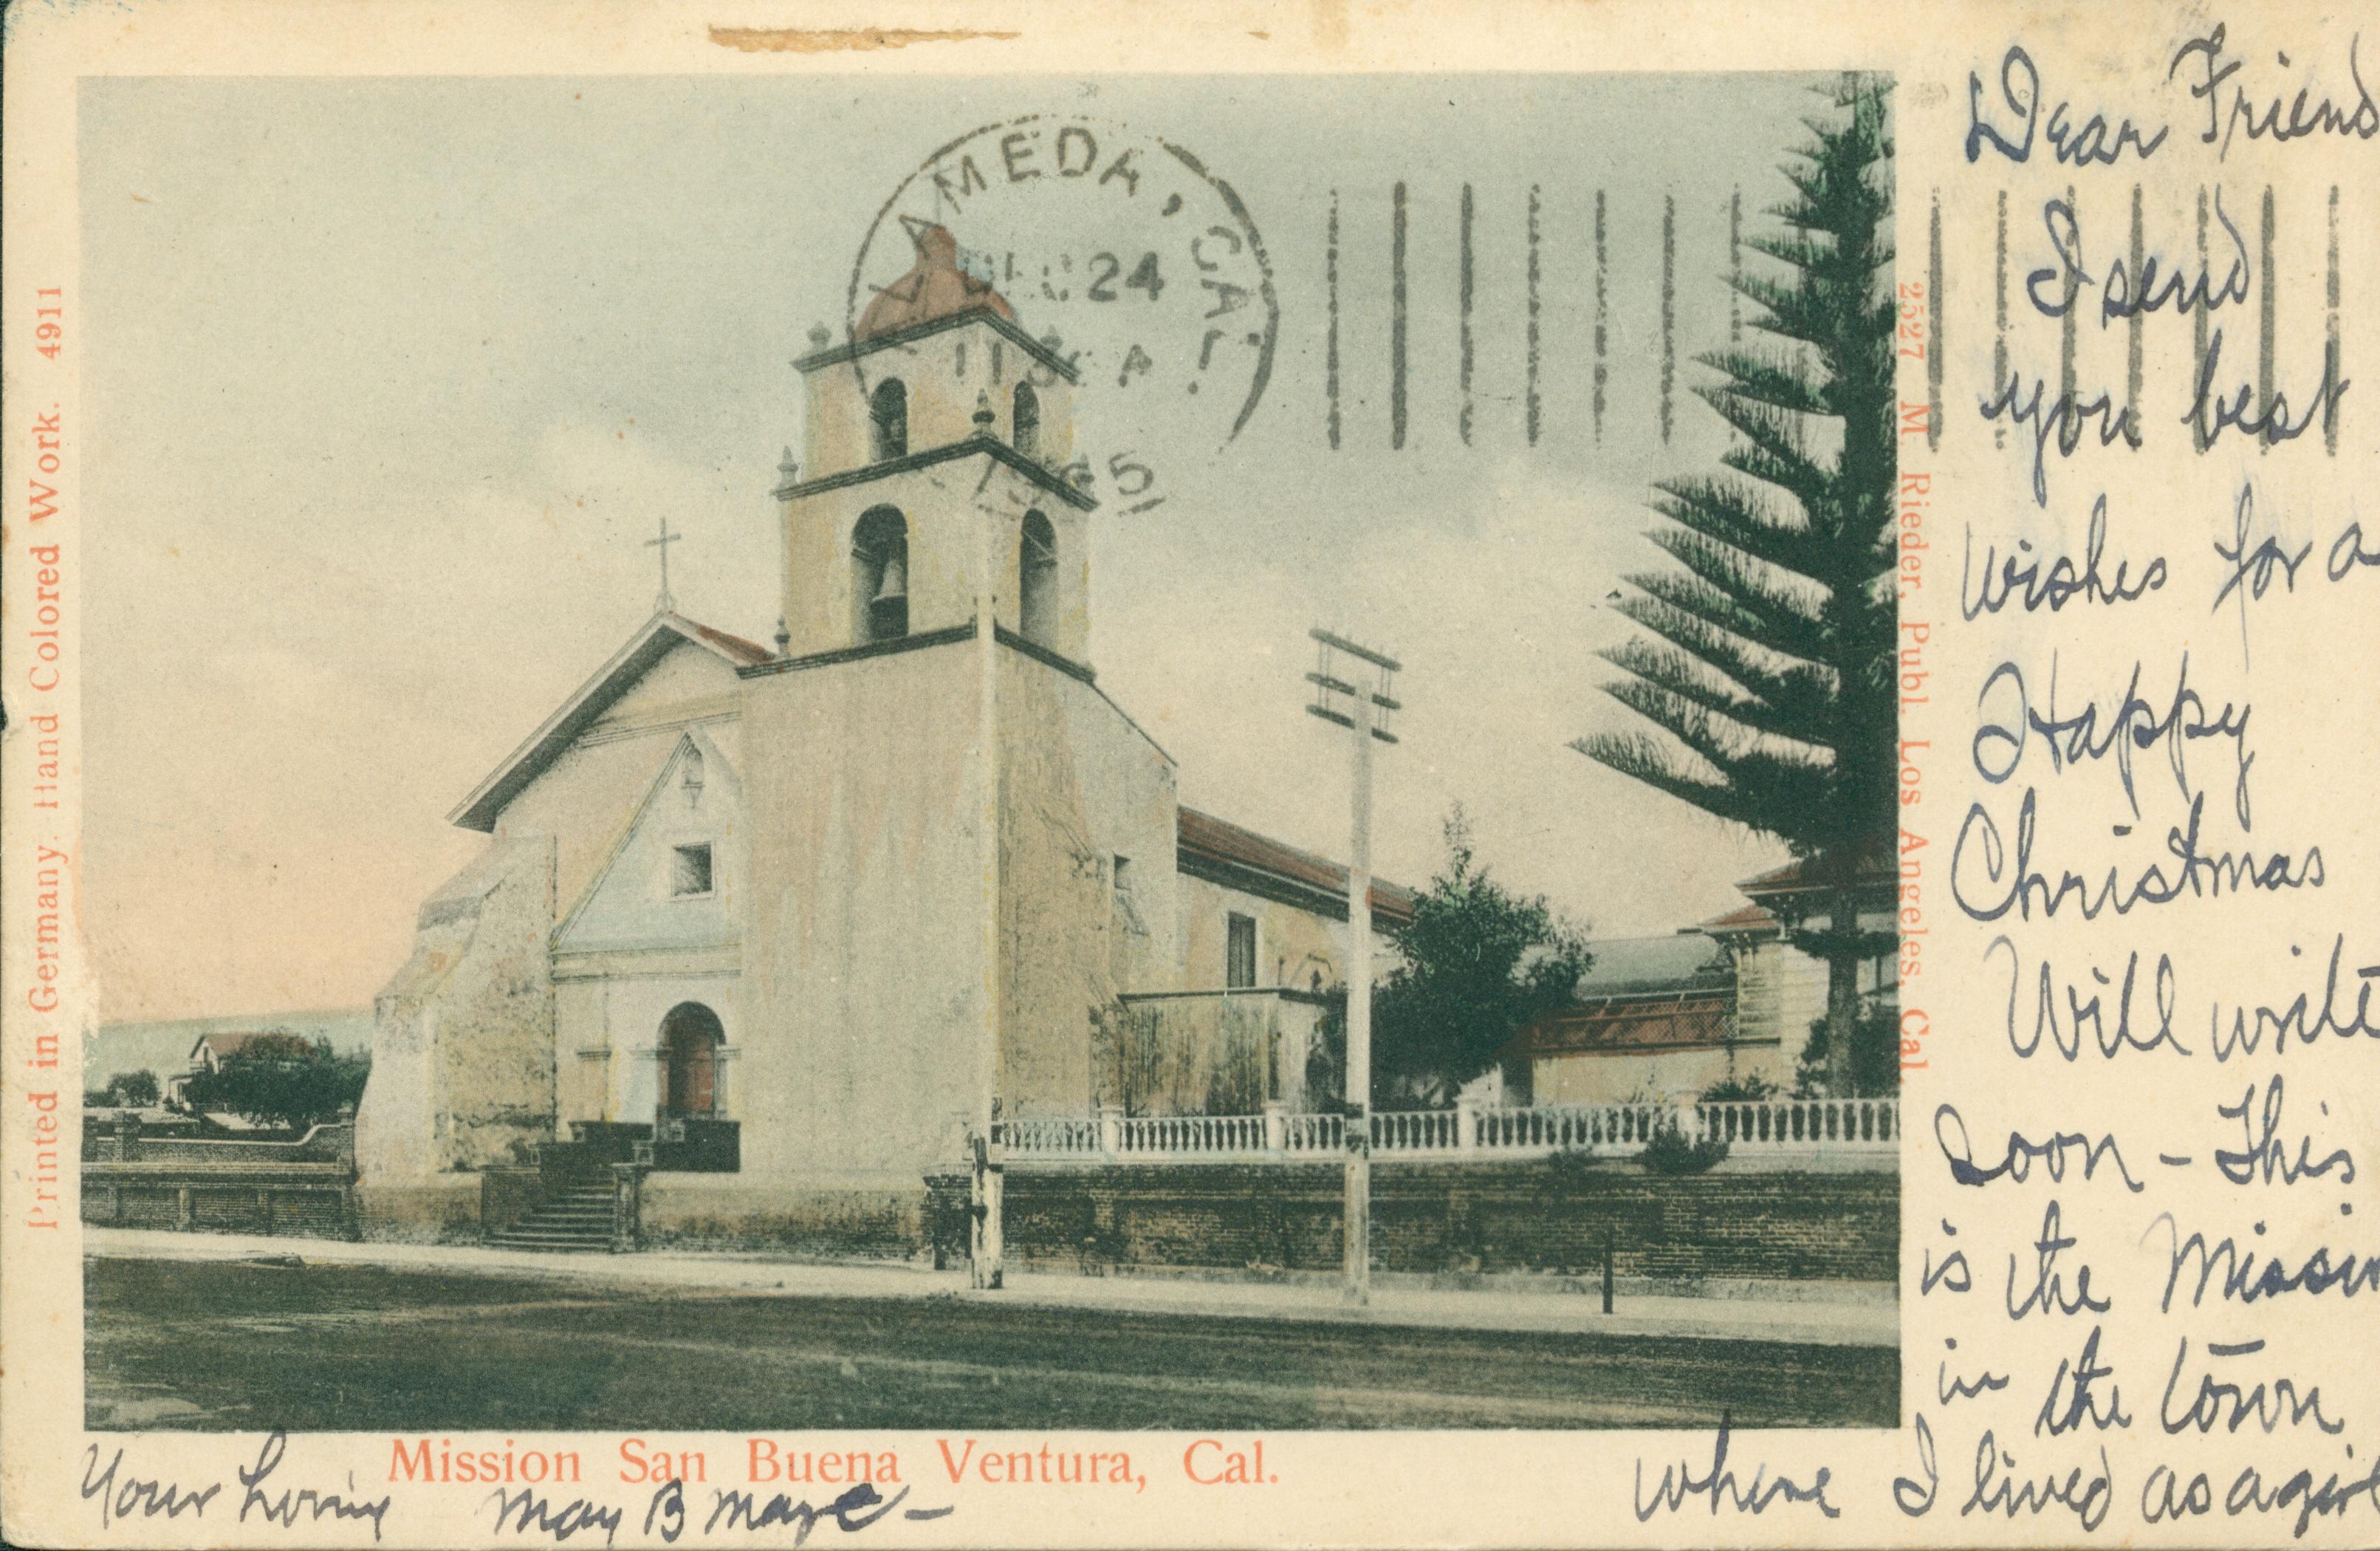 Shows the exterior of the San Buenaventura mission church